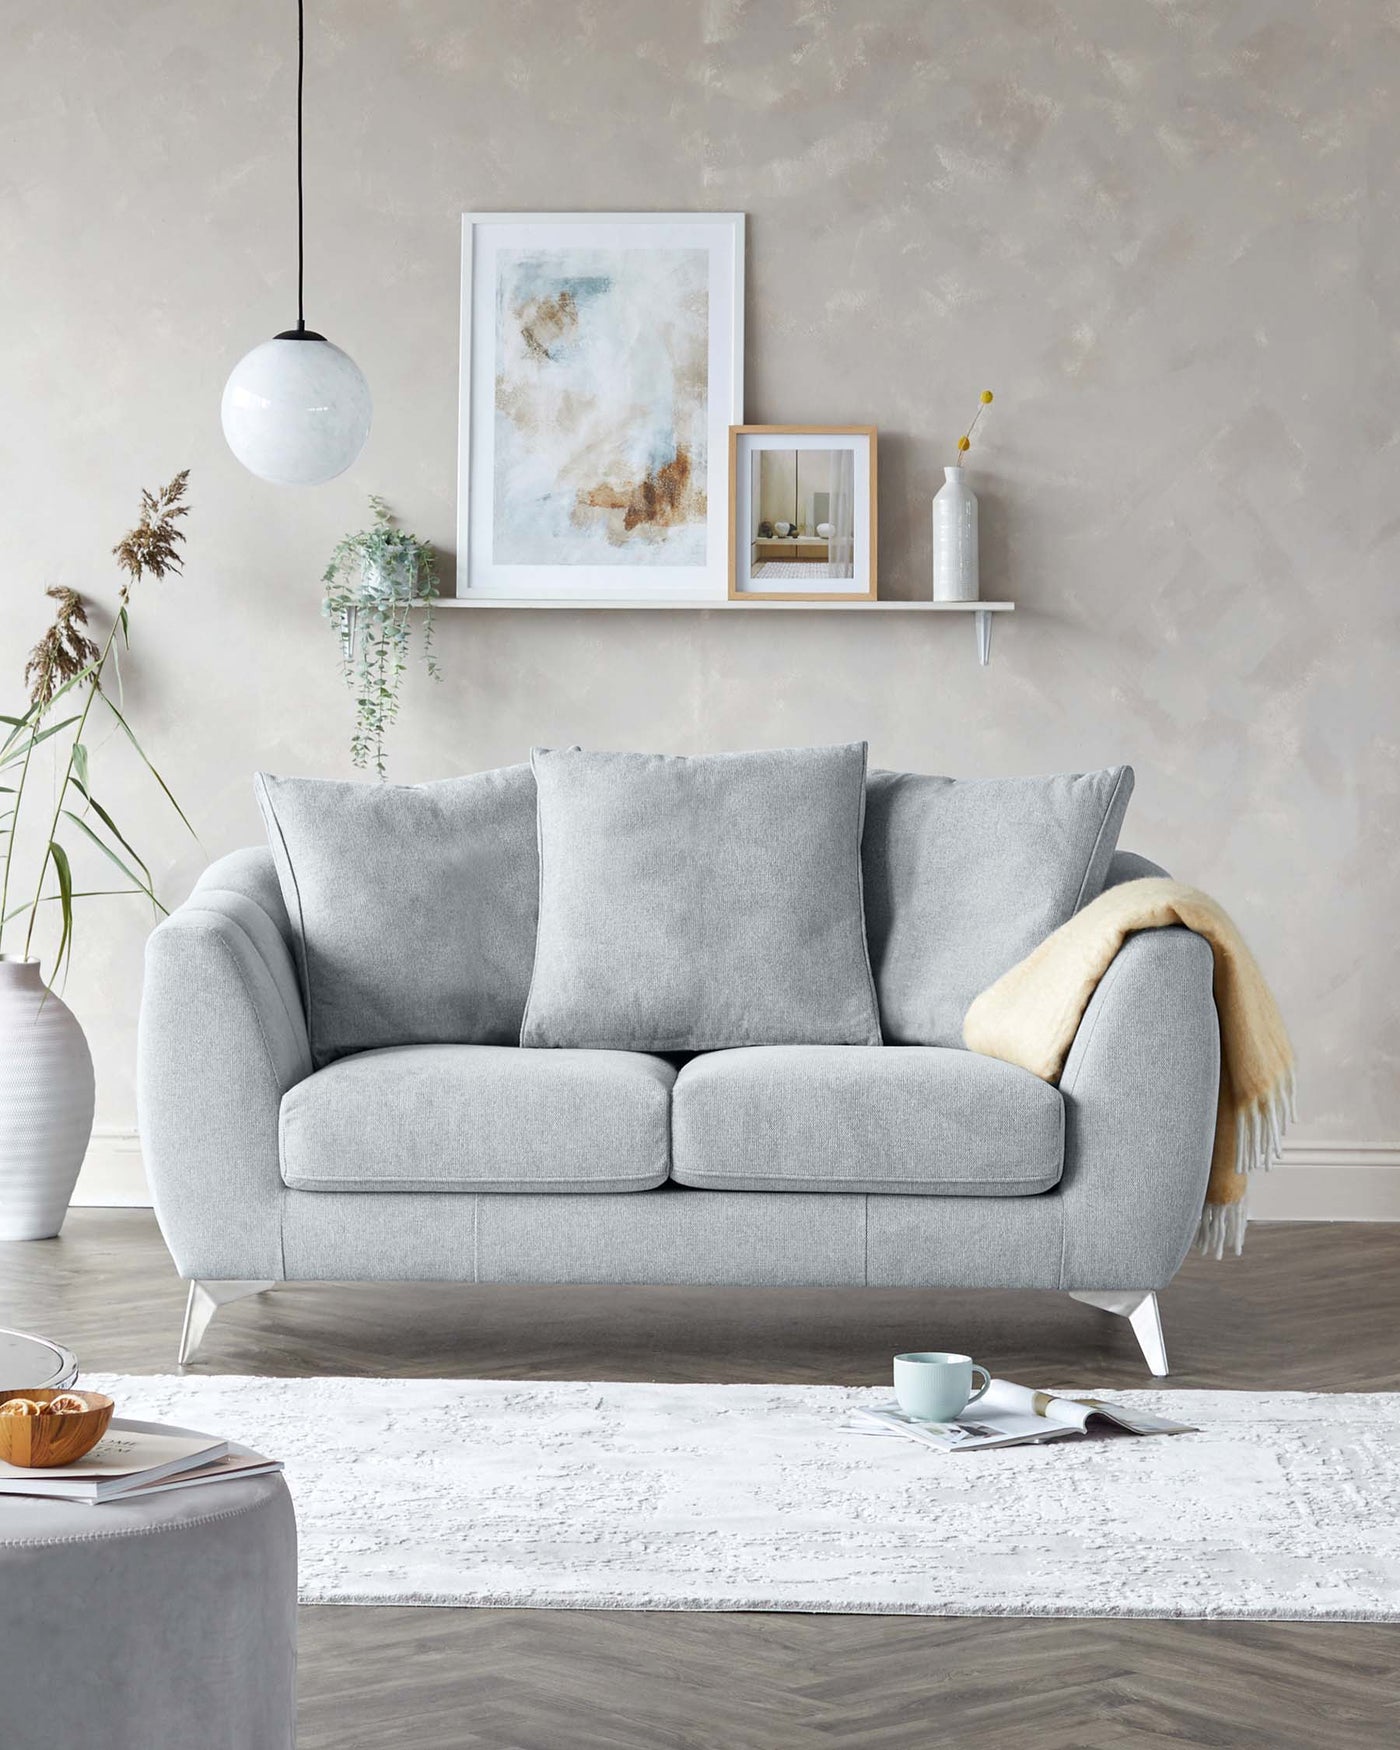 Elegant modern two-seater sofa with plush grey fabric upholstery, featuring deep cushioned seats, a gently curved backrest, and sleek, minimalistic metal legs. A soft beige throw is draped on one side, adding a touch of warmth to the otherwise cool tones of the room. The sofa is complemented by a textured white area rug beneath it, creating a cosy and stylish living space.